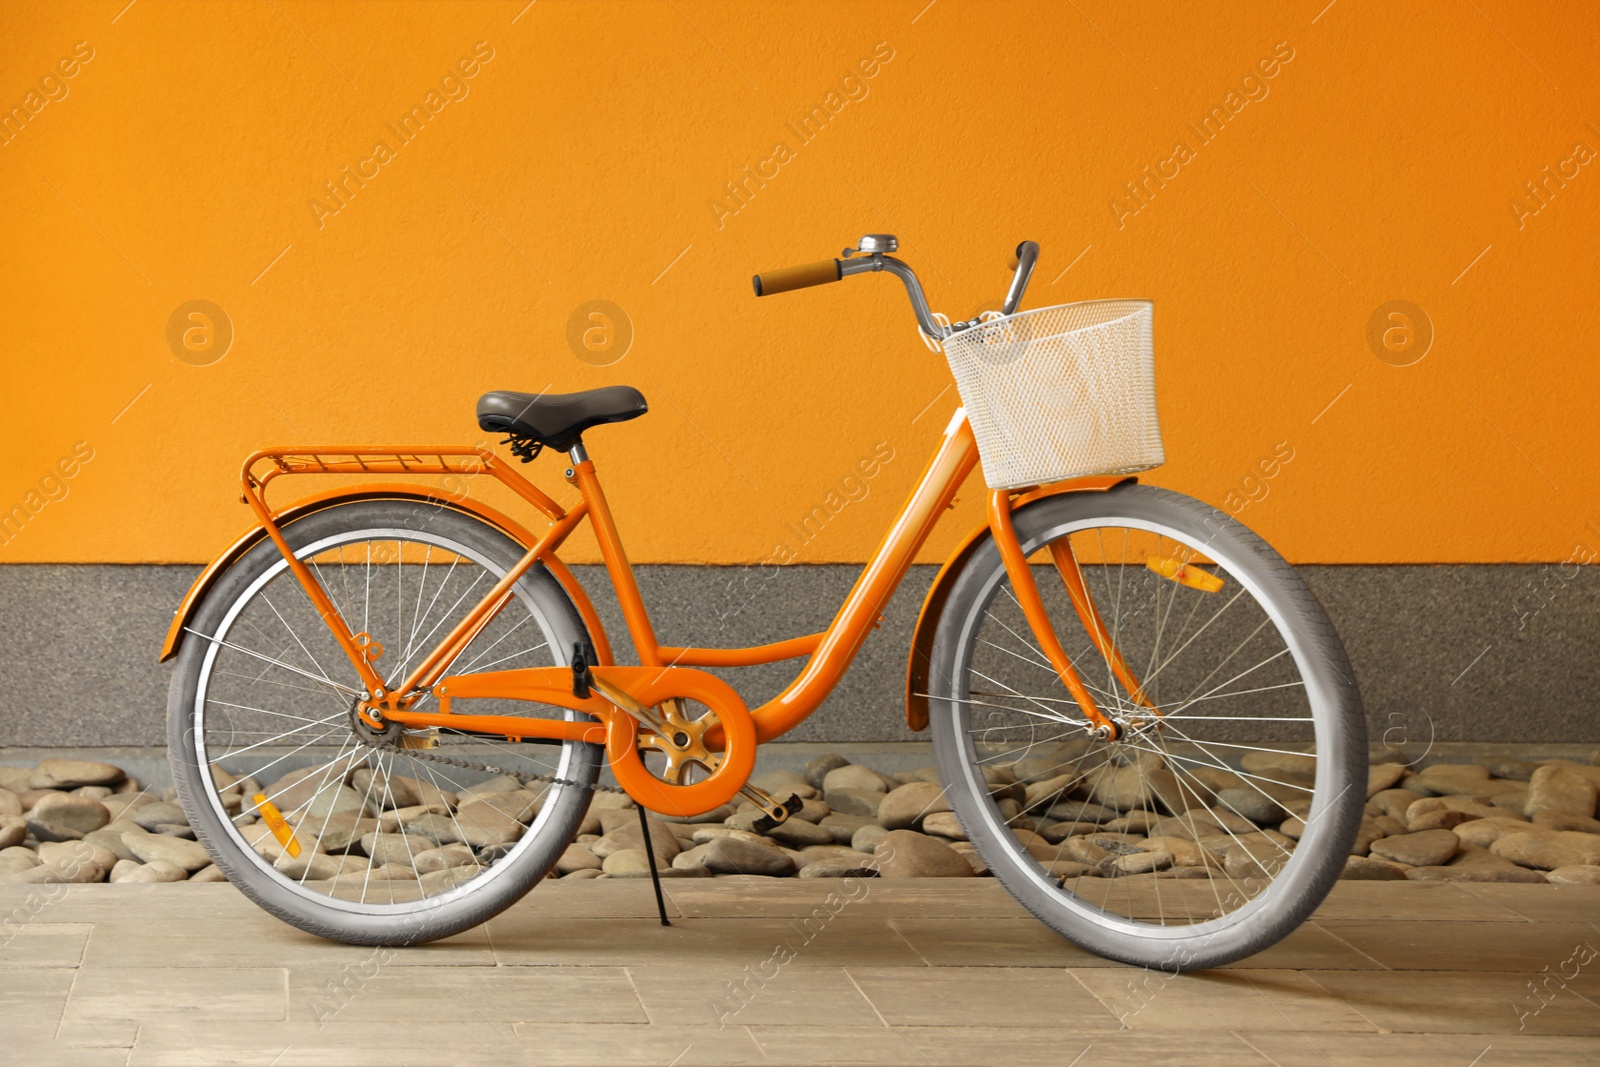 Image of Modern color bicycle with basket near orange wall outside